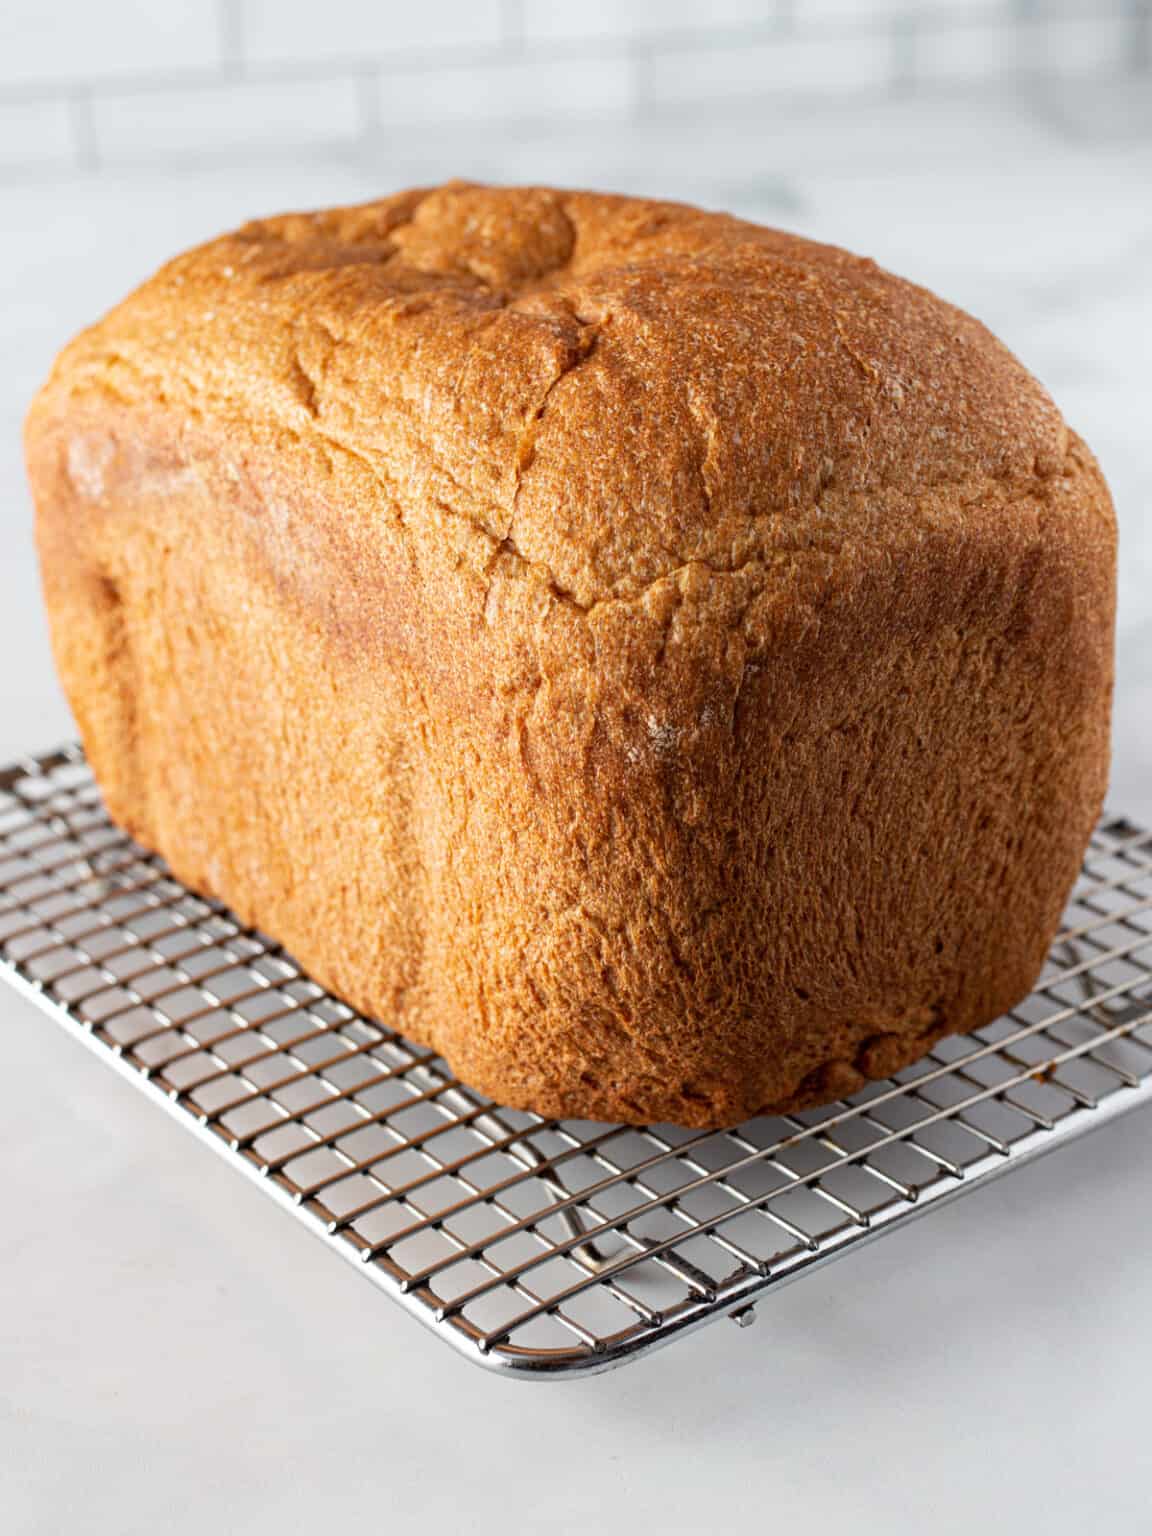 100% Whole Wheat Bread Machine Recipe - Cook Fast, Eat Well